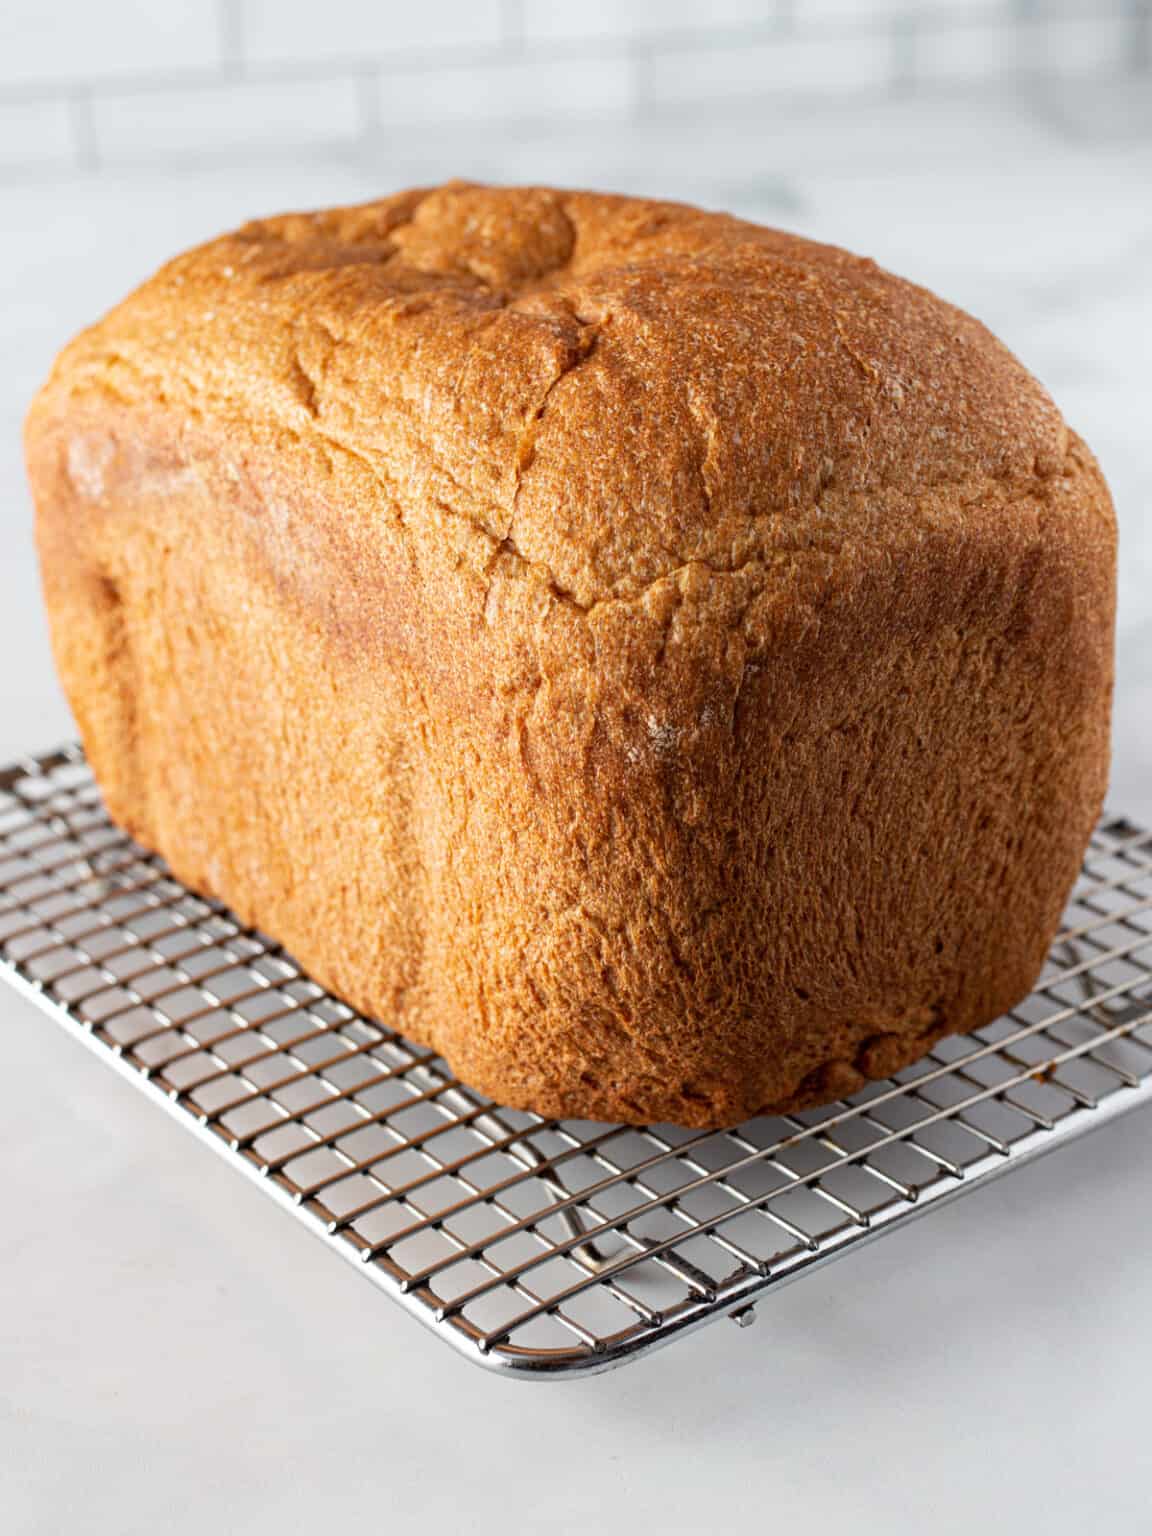 100% Whole Wheat Bread Machine Recipe - Cook Fast, Eat Well